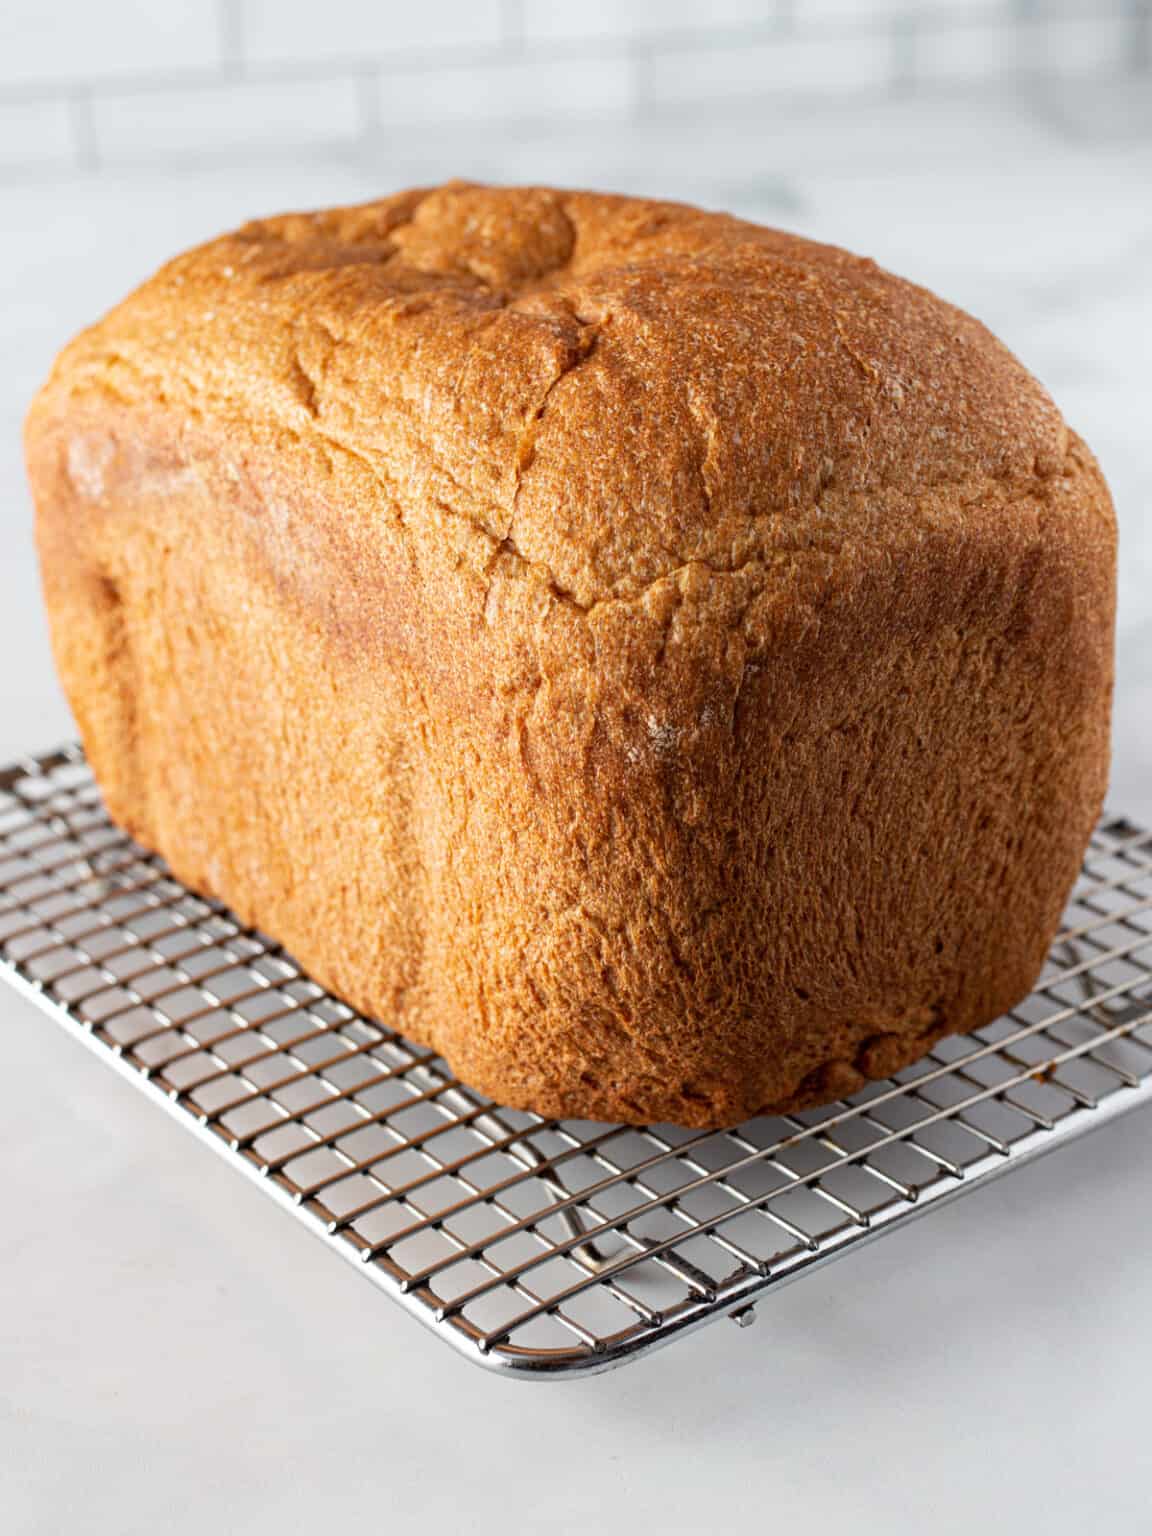 100% Whole Wheat Bread Machine Recipe - Cook Fast, Eat Well